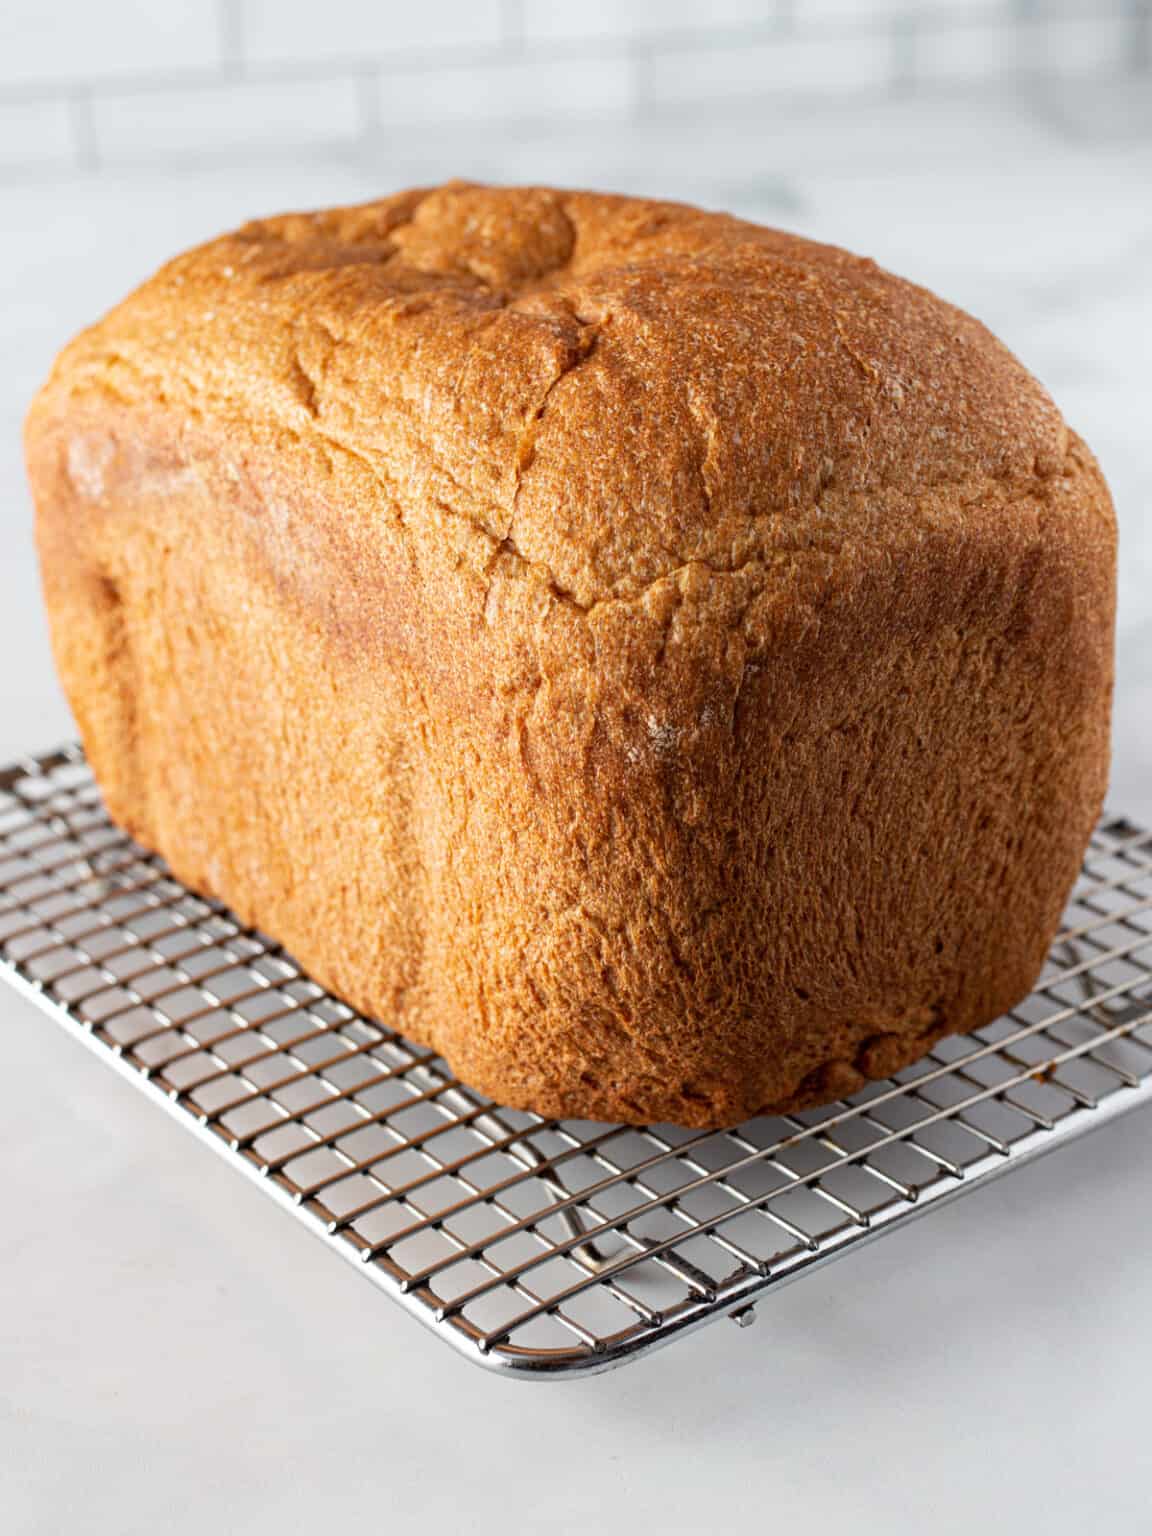 100% Whole Wheat Bread Machine Recipe - Cook Fast, Eat Well